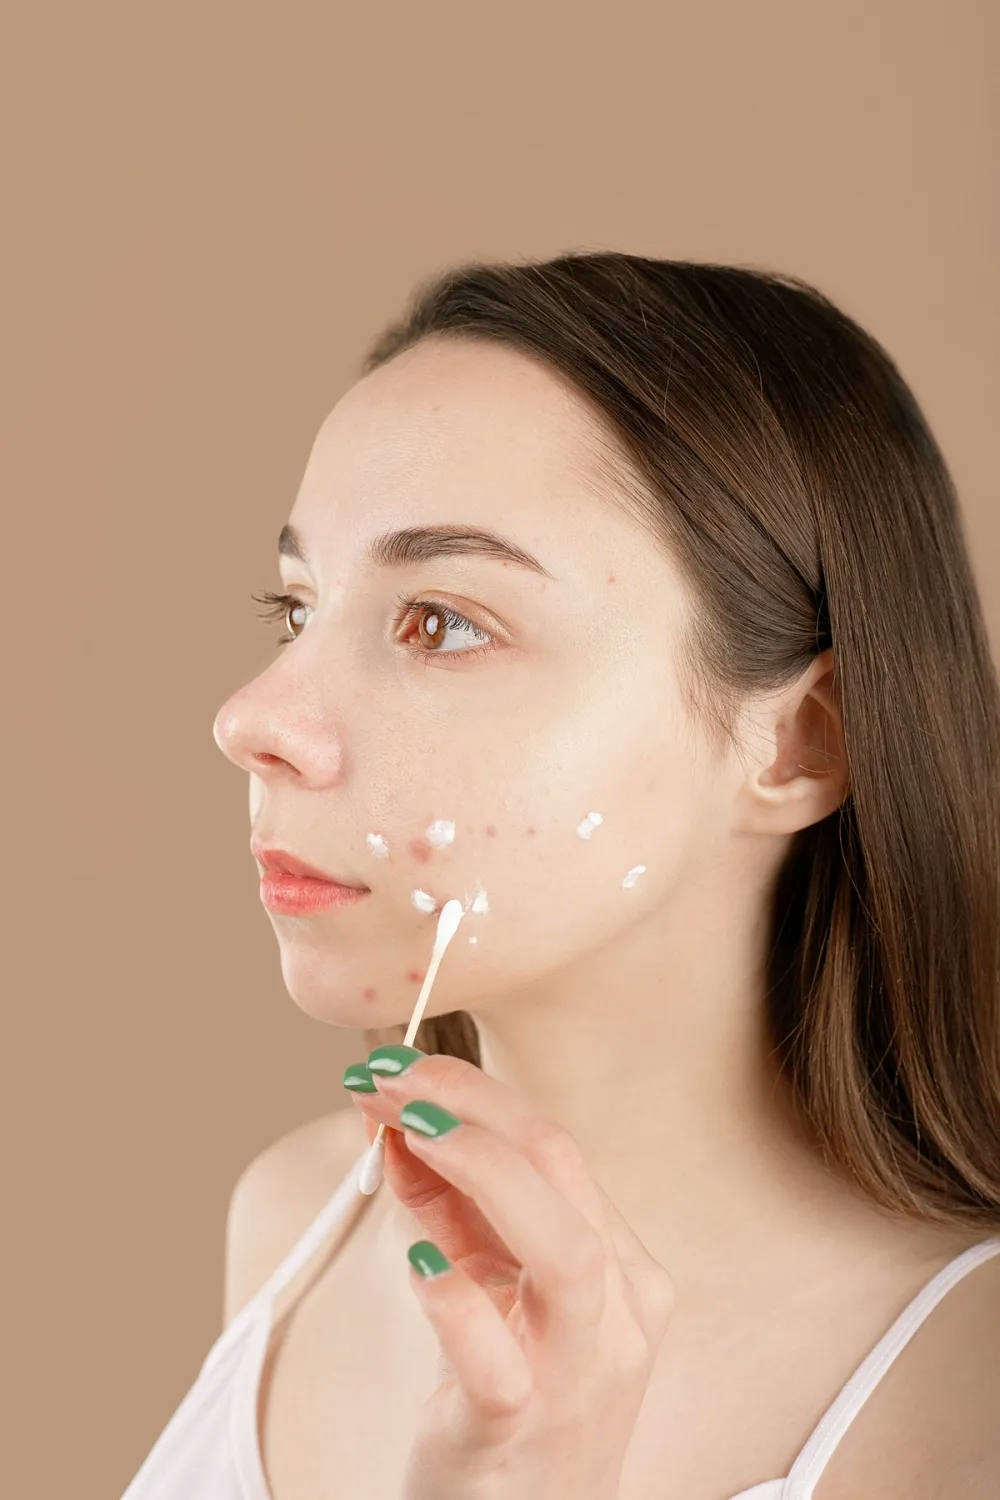 A woman applying a white cream on spots on her face